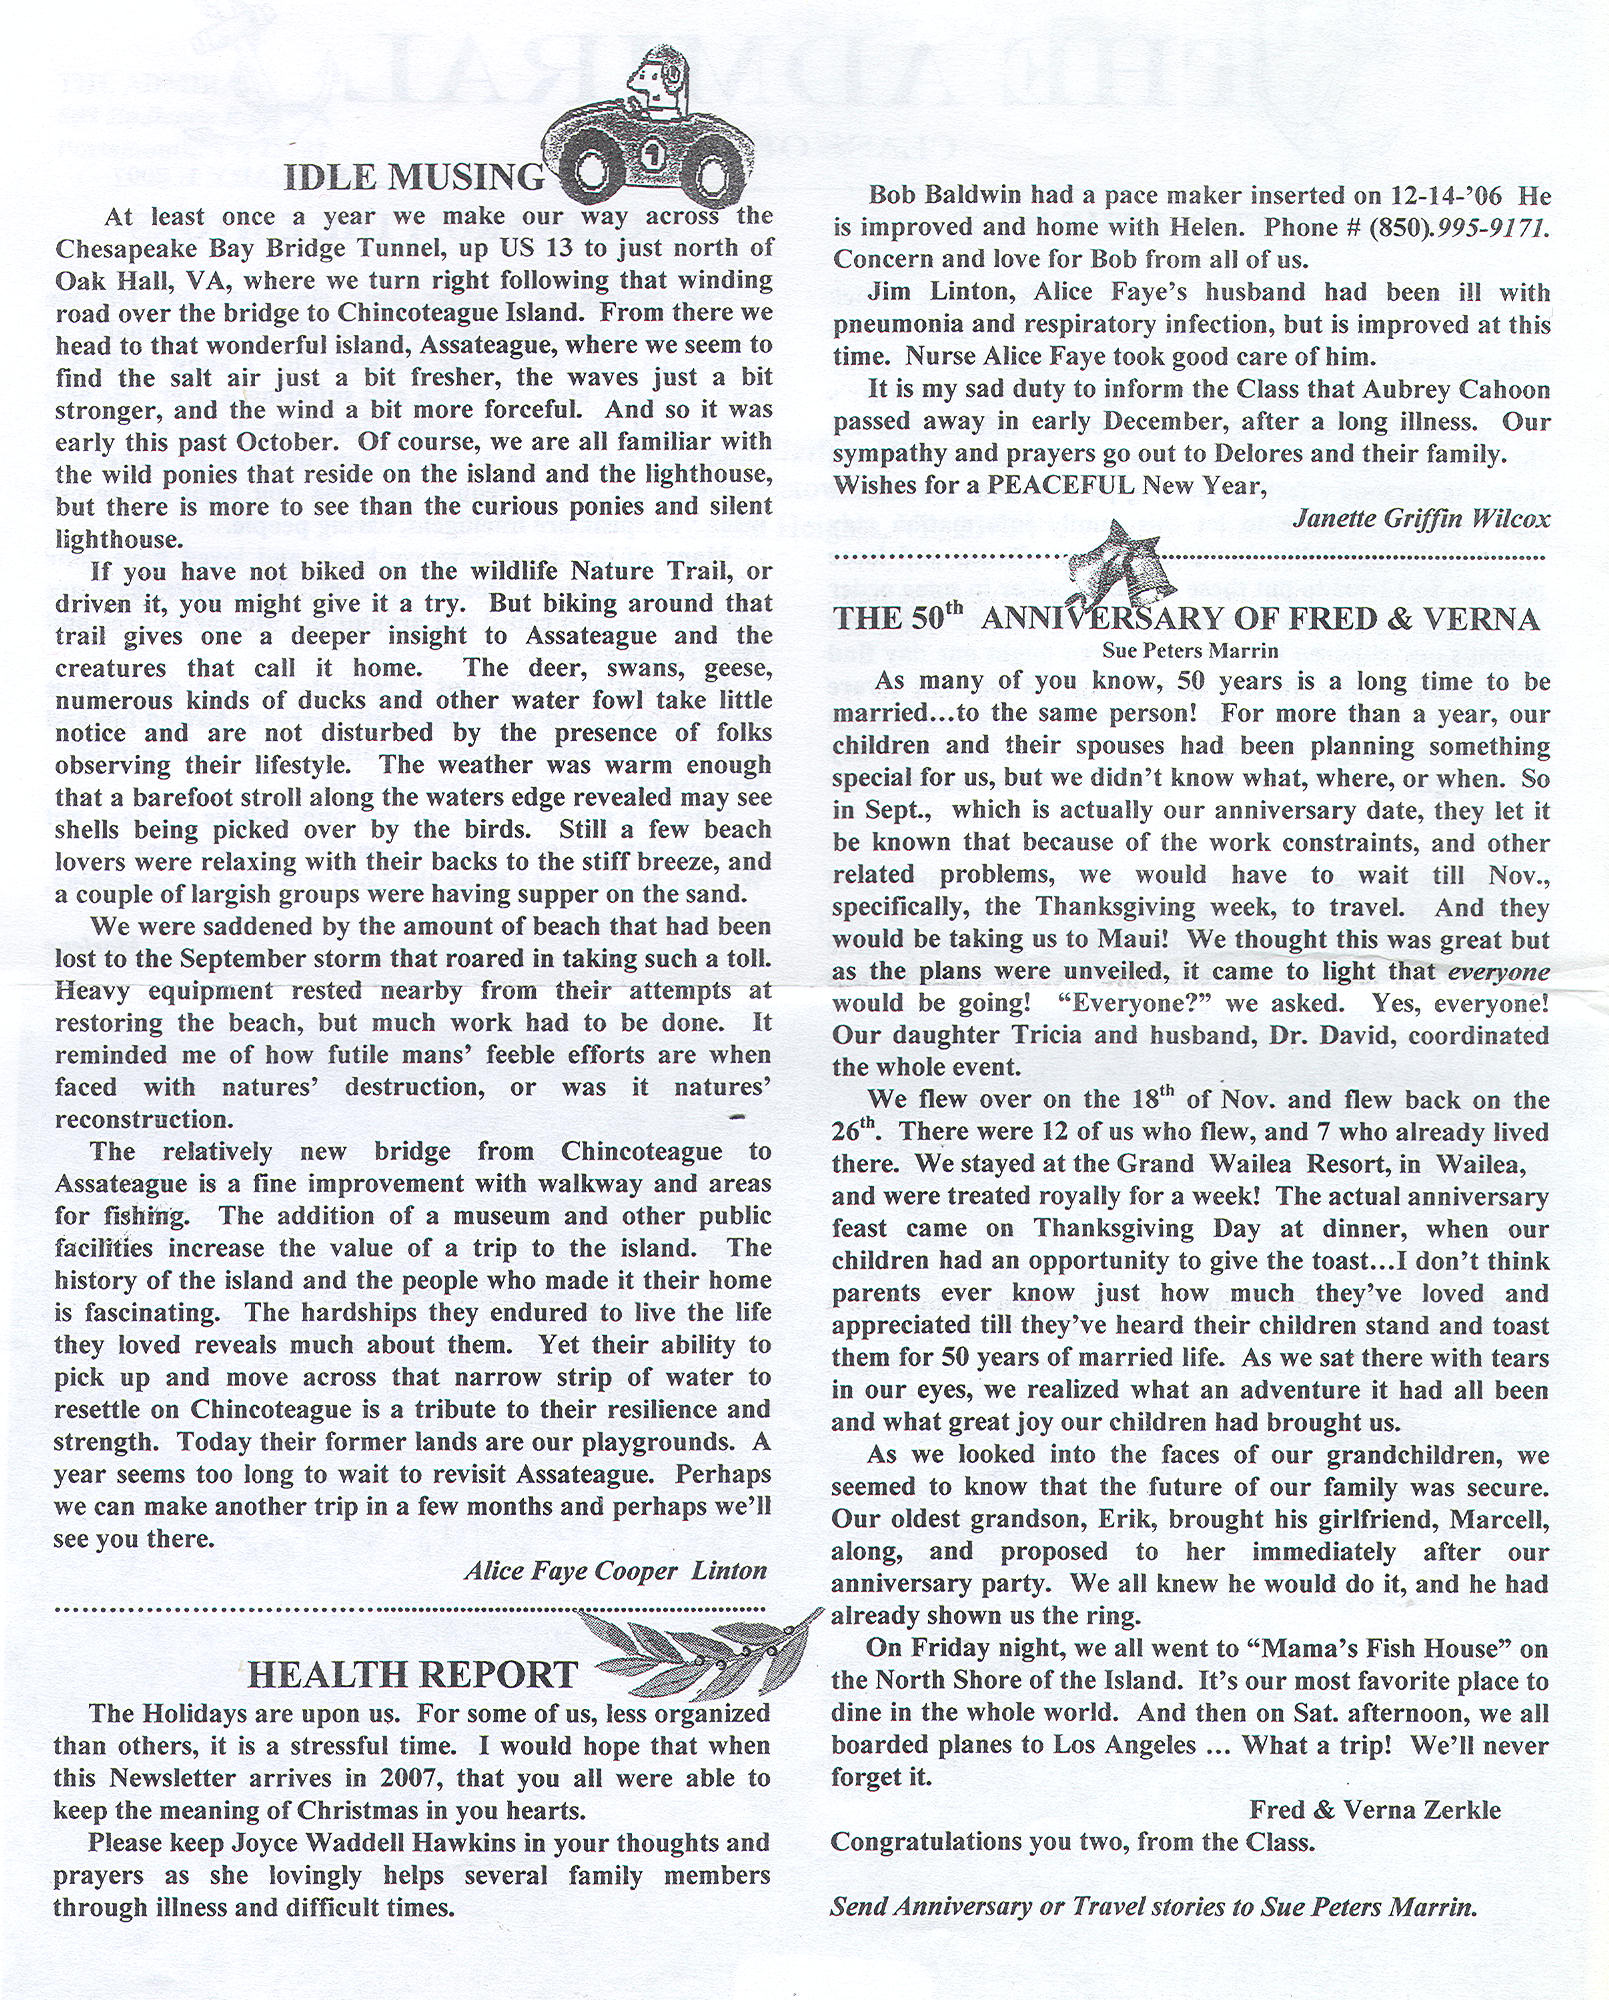 The Admiral - January 2007 - pg. 2